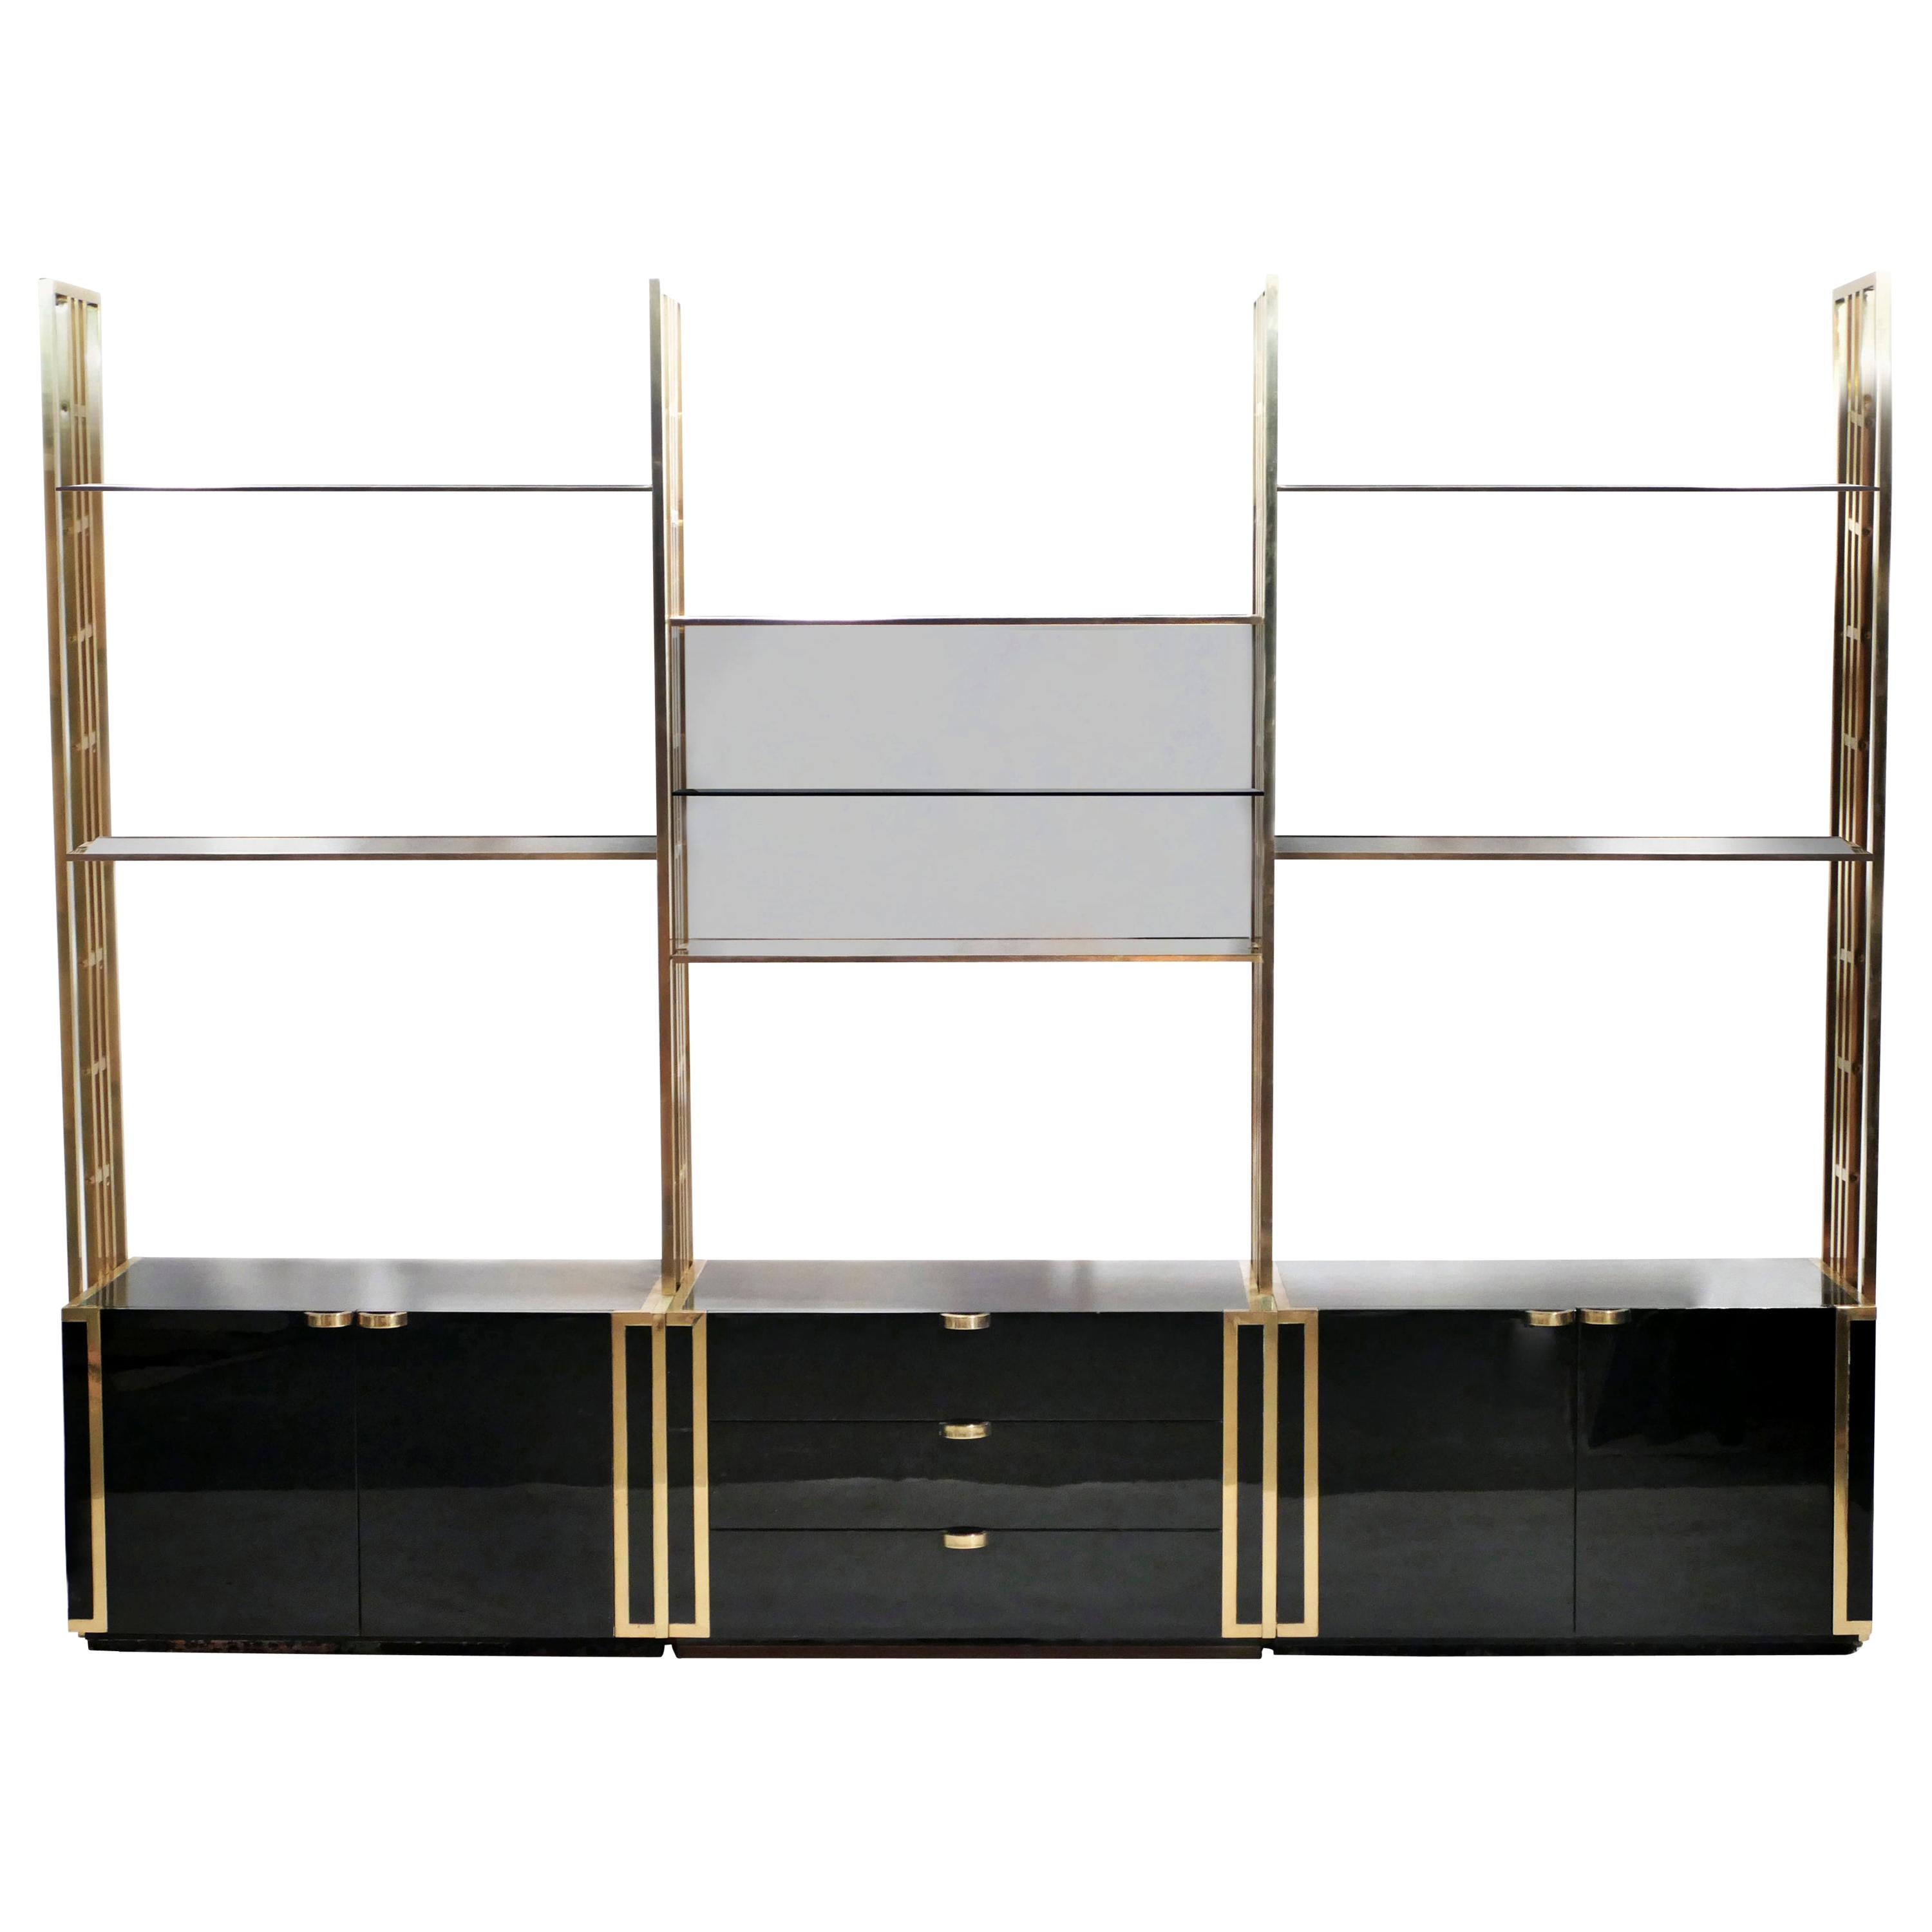 Rare Kim Moltzer French Lacquer and Brass Shelves, 1970s For Sale